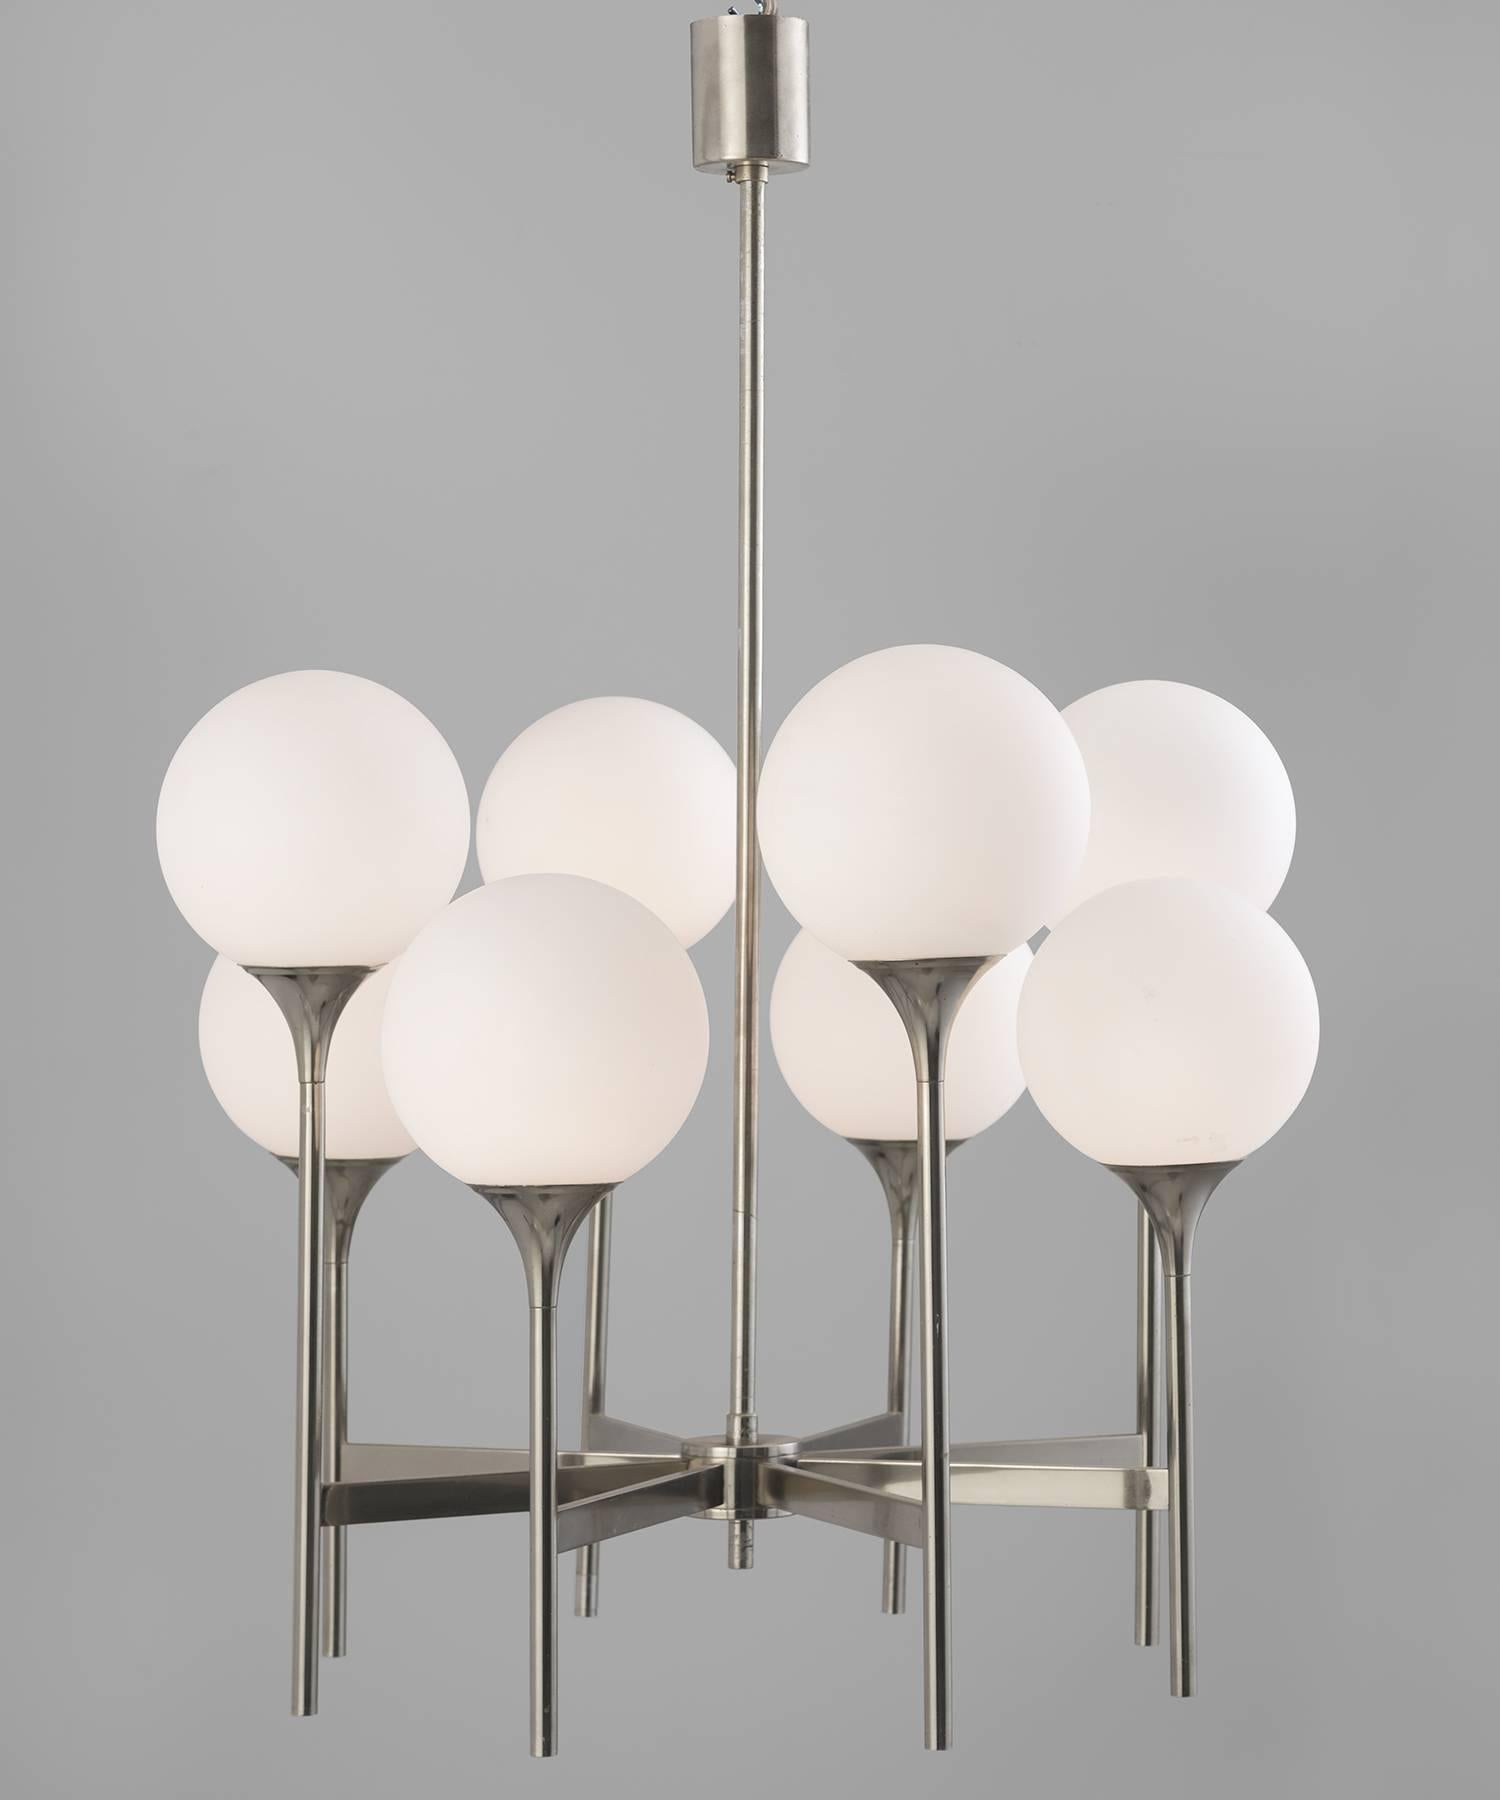 Chrome and frosted glass chandelier, circa 1970

Eight frosted globes on chrome fluted arms.